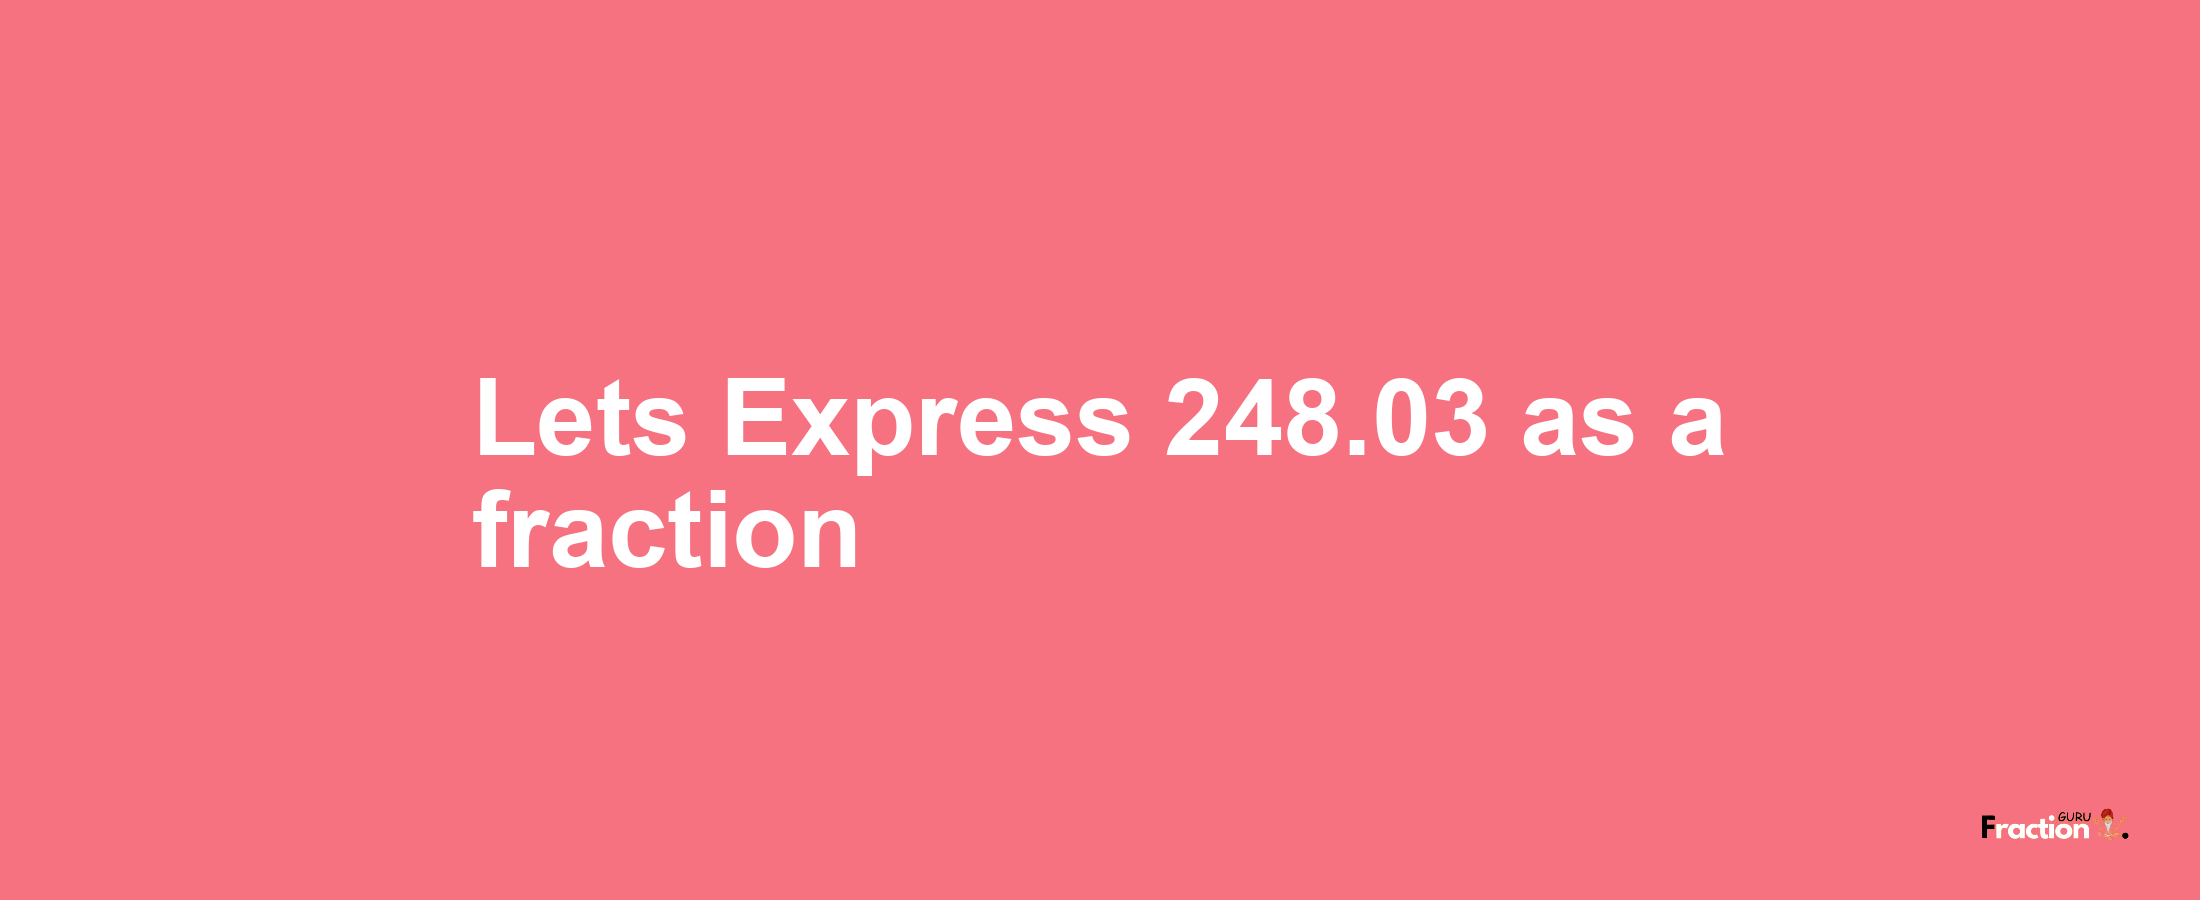 Lets Express 248.03 as afraction